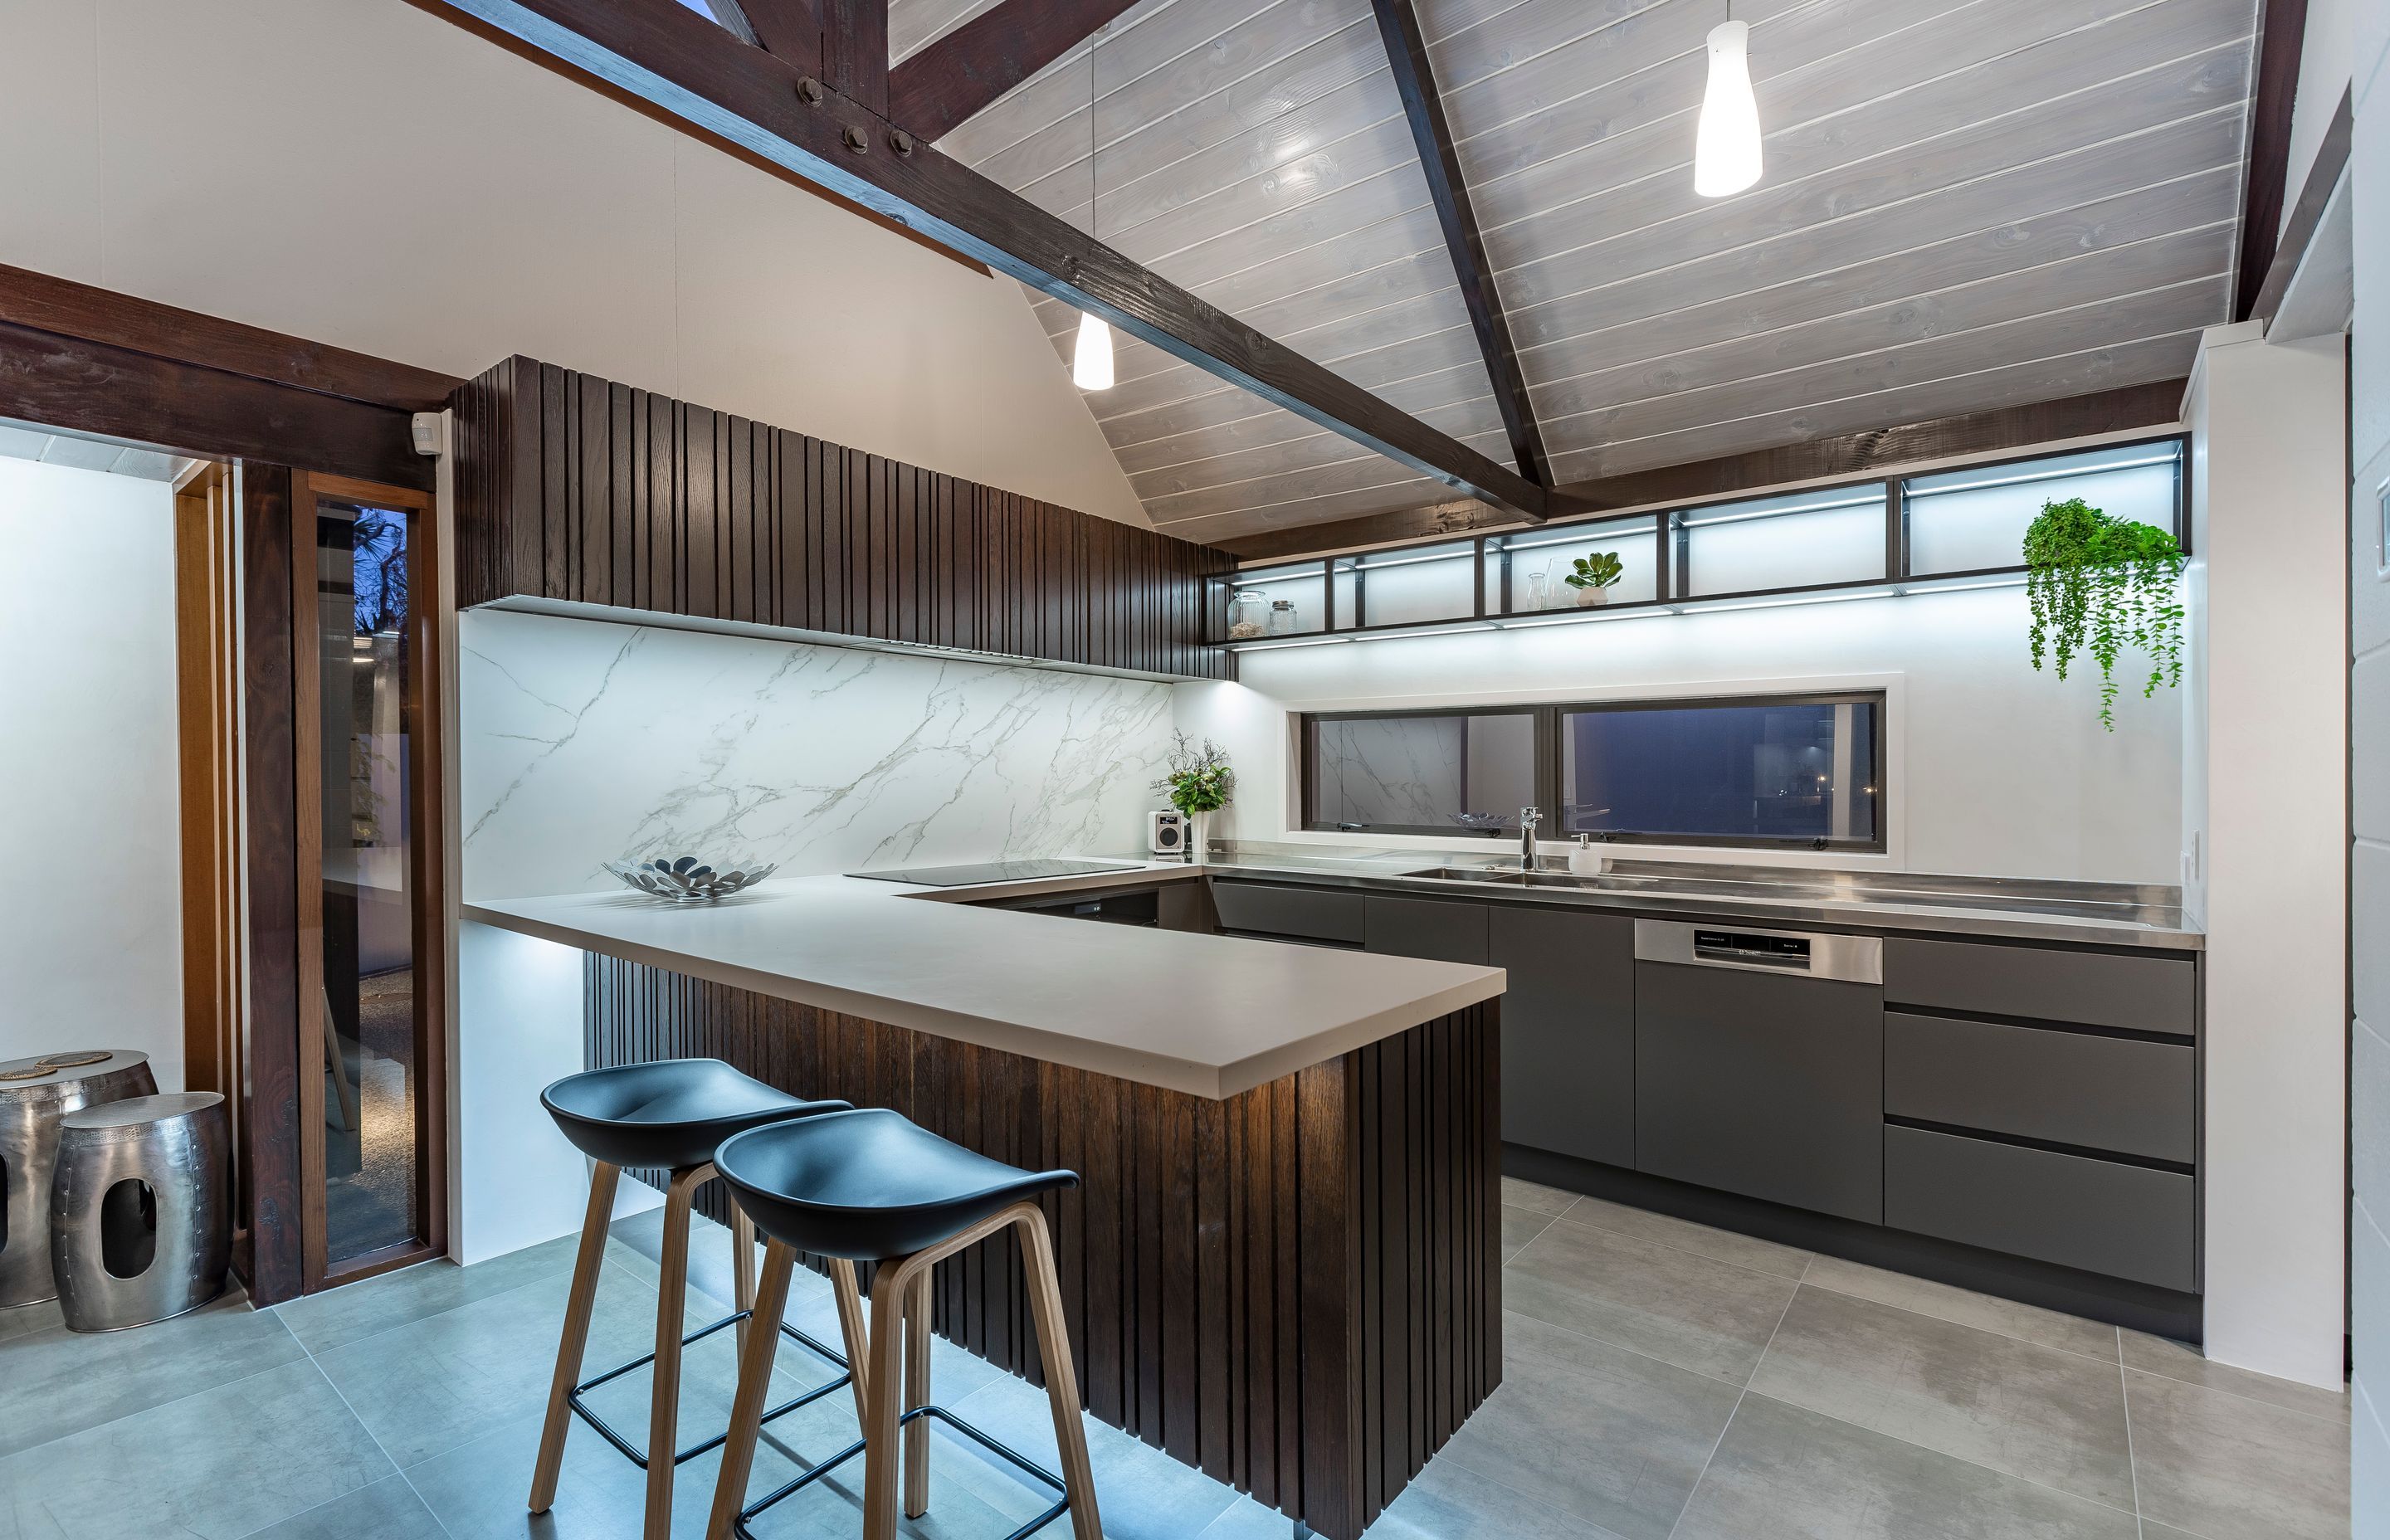 The under-lit, cantilevered peninsula appears to float above the kitchen floor helping the structure appear lightweight and unobtrusive within the larger space.